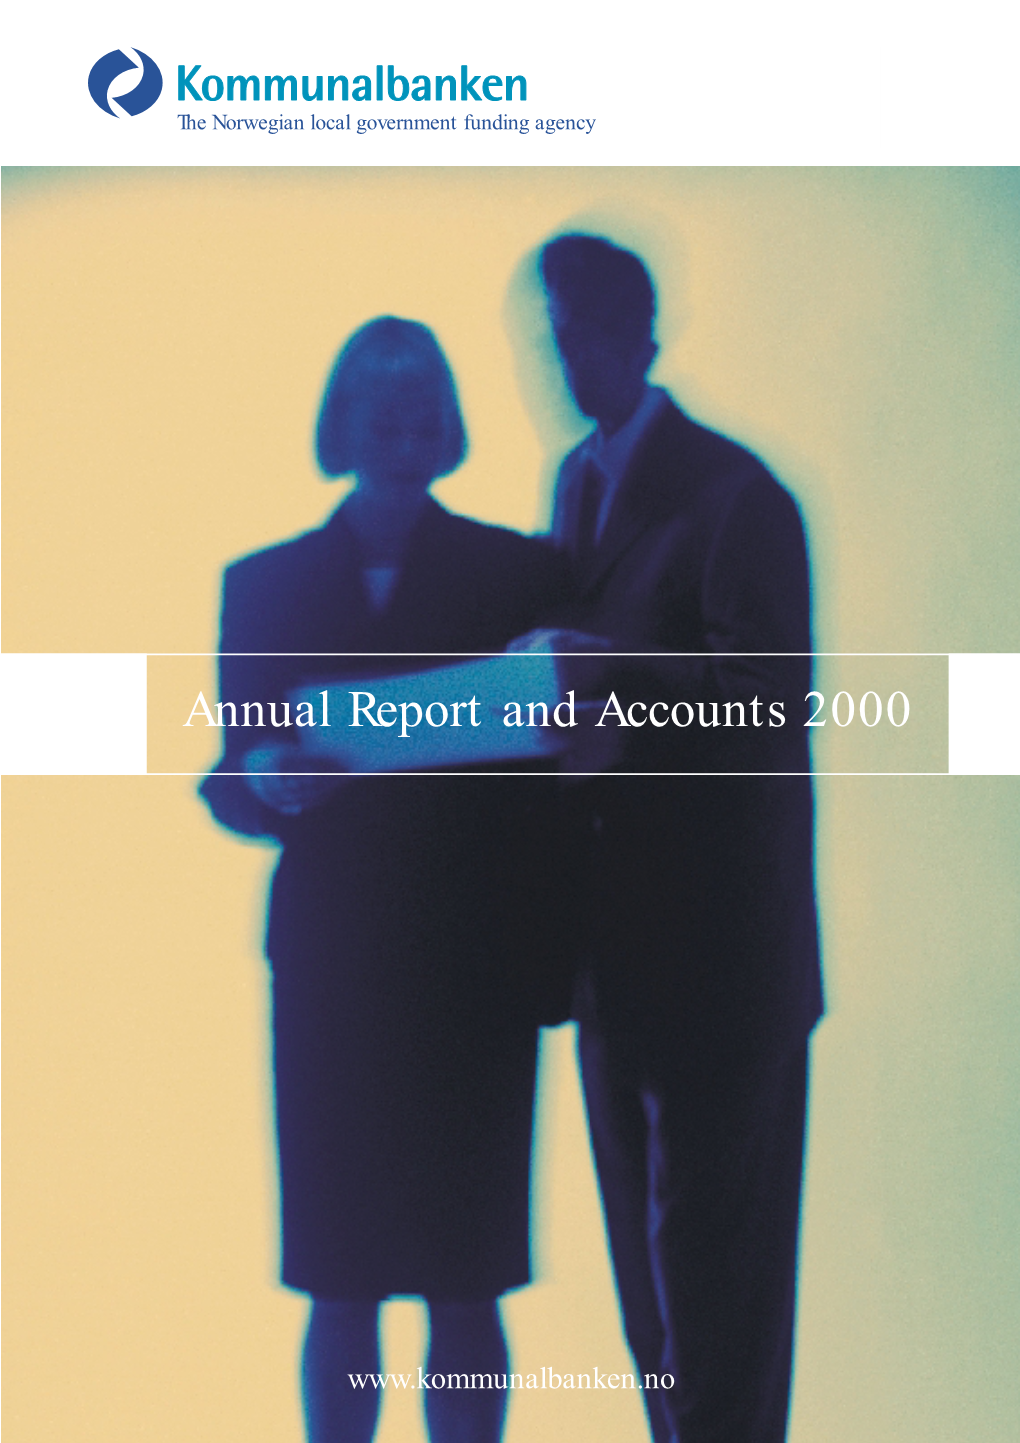 Annual Report and Accounts 2000